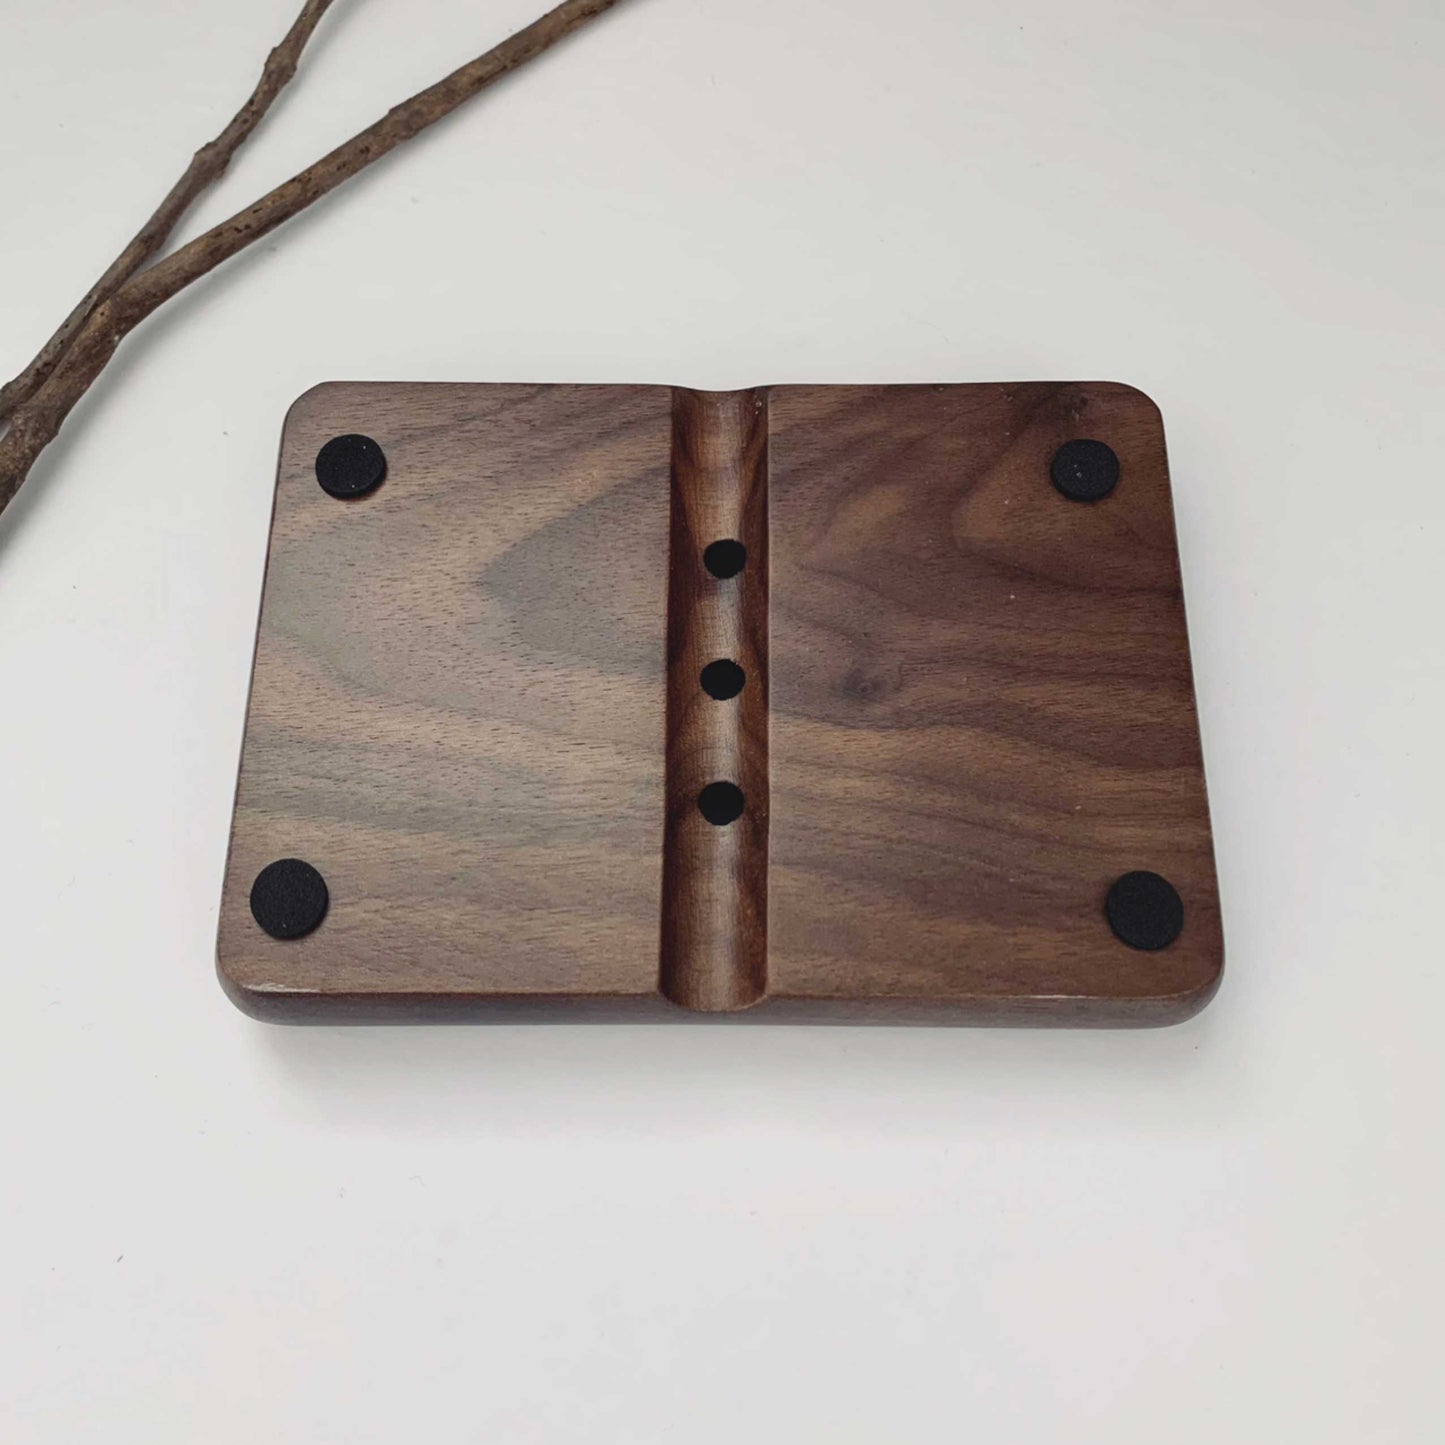 Handcrafted Solid Walnut Wood Soap Dish